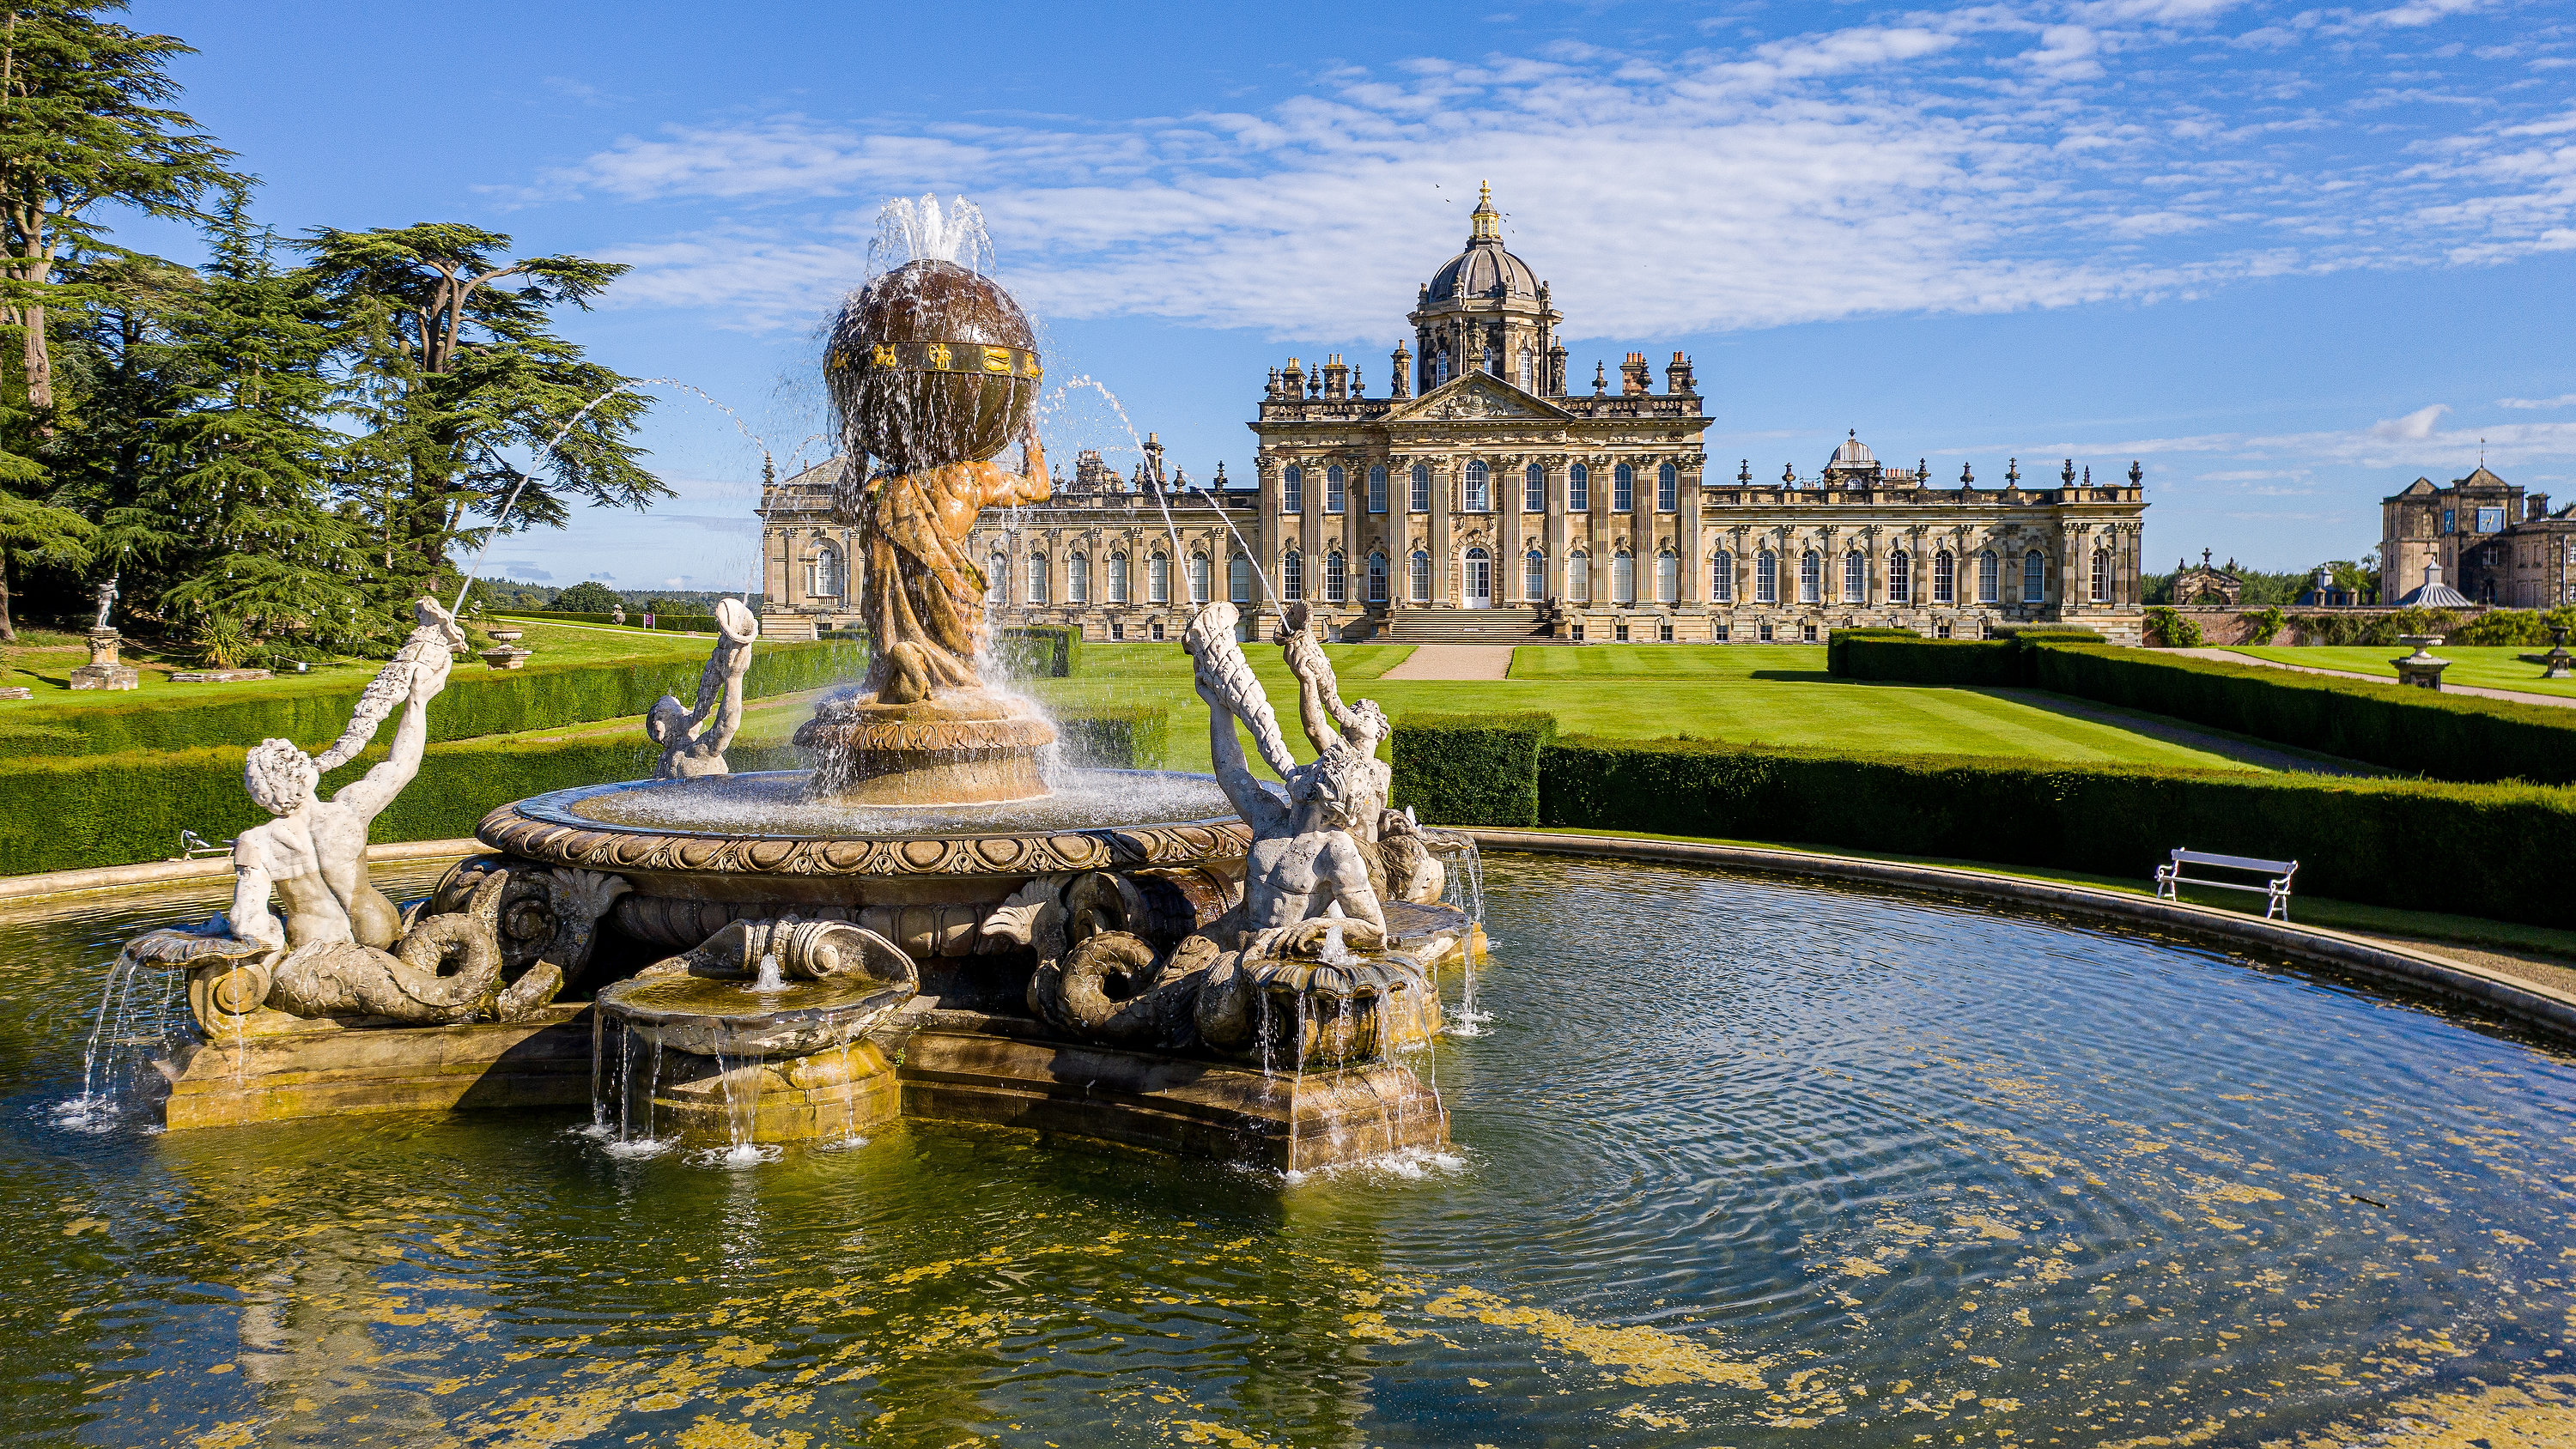 Castle Howard with a fountain in the foreground